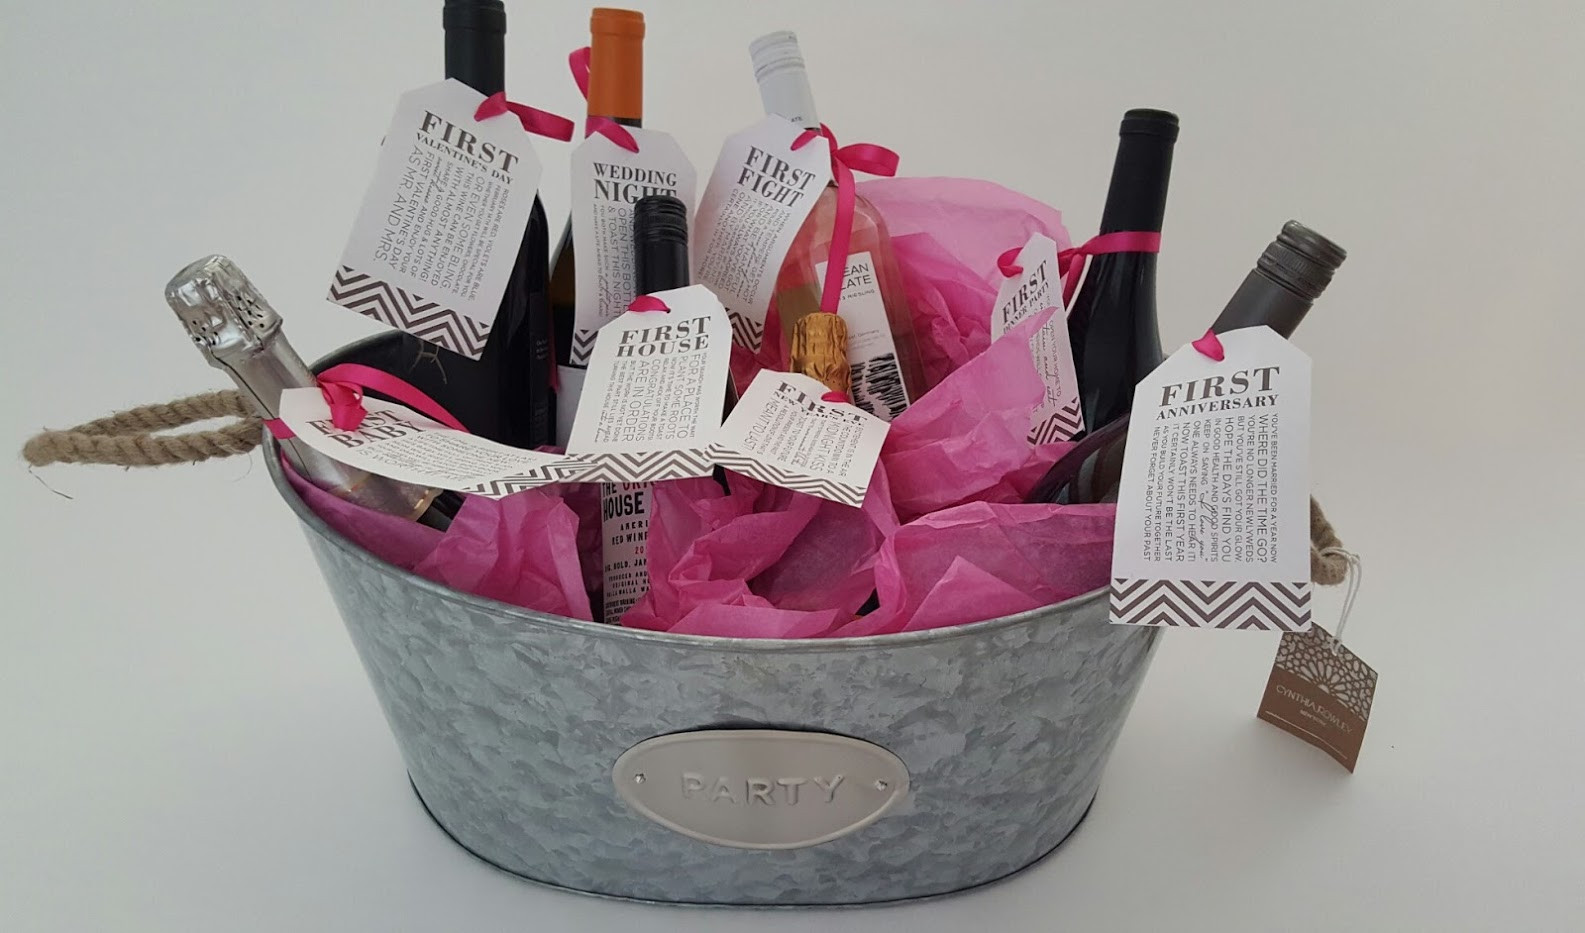 DIY Bridal Shower Gifts
 Bridal Shower Gift DIY to Try A Basket of “Firsts” for